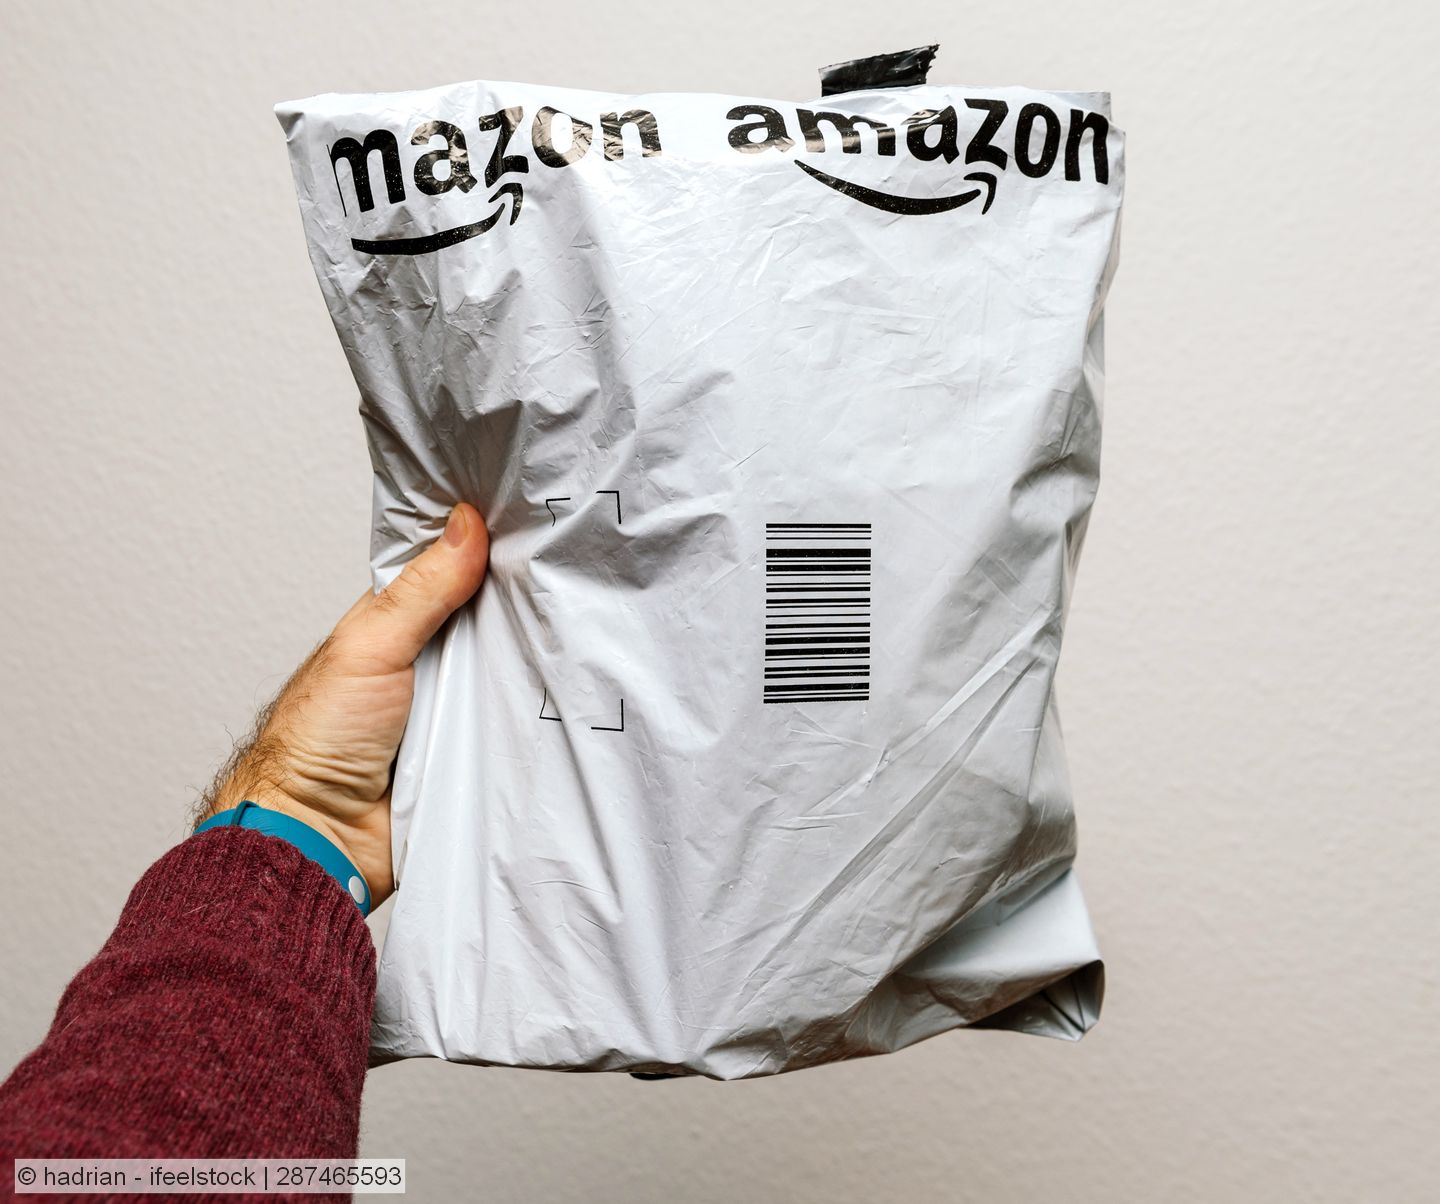 Amazon to replace plastic bags with paper alternatives in France